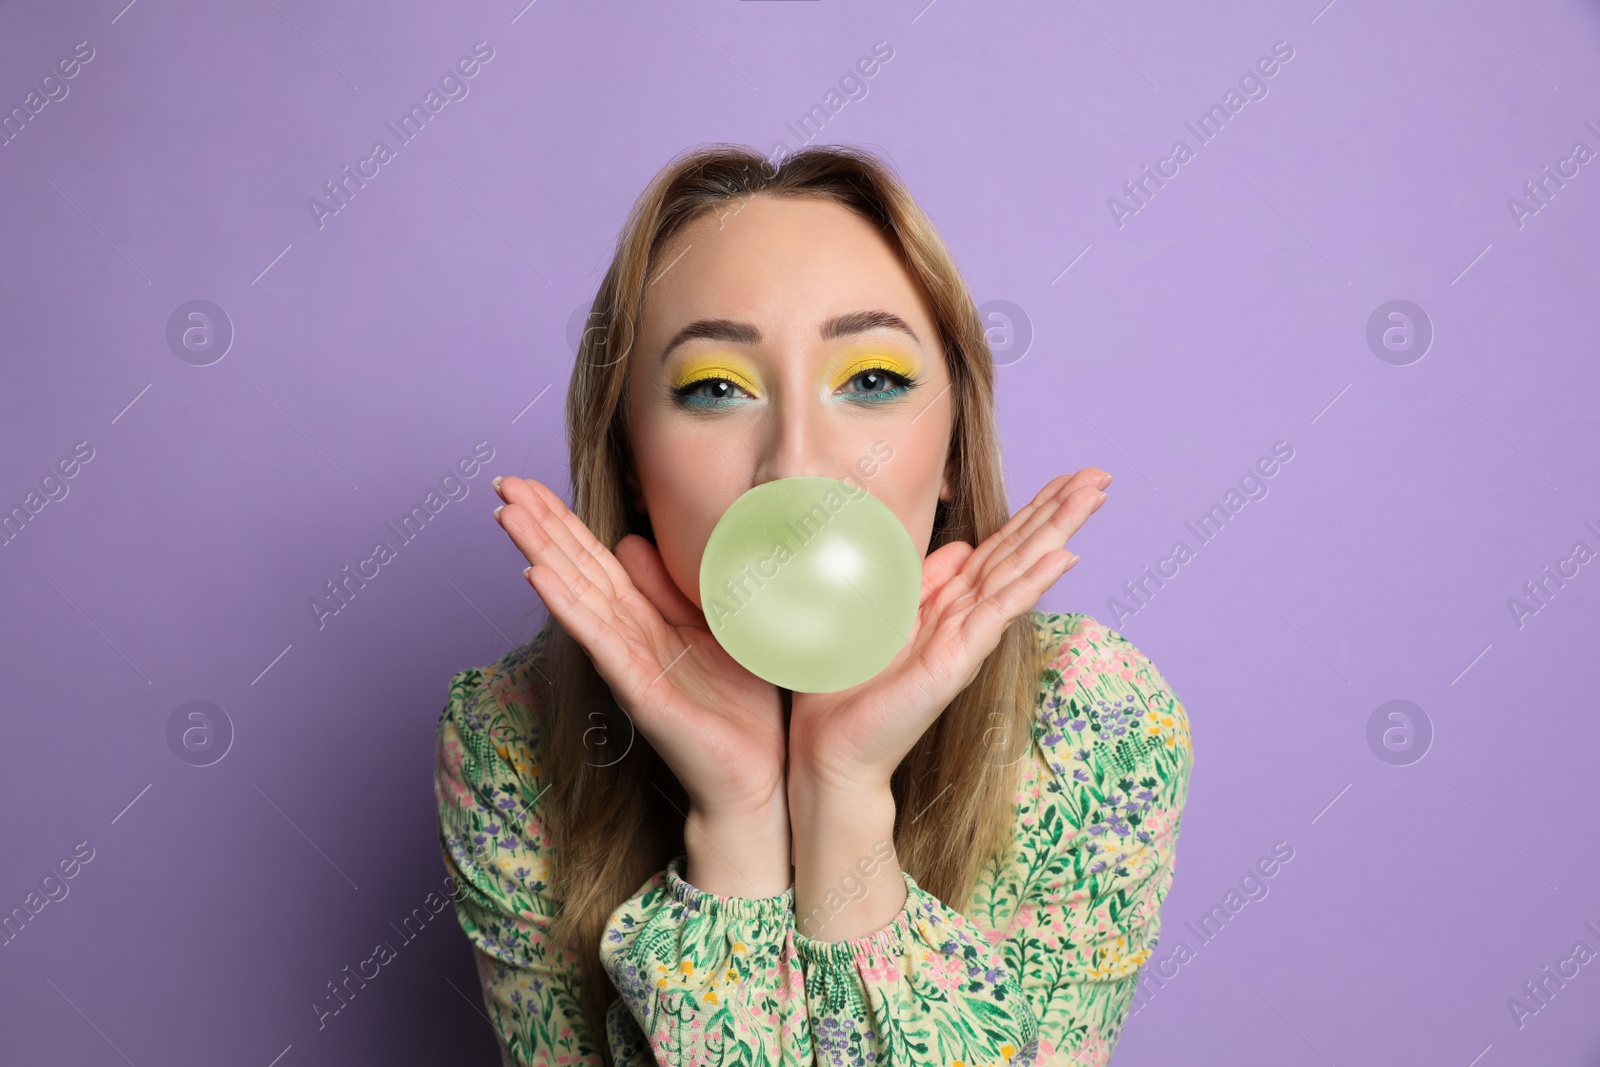 Photo of Fashionable young woman with bright makeup blowing bubblegum on lilac background